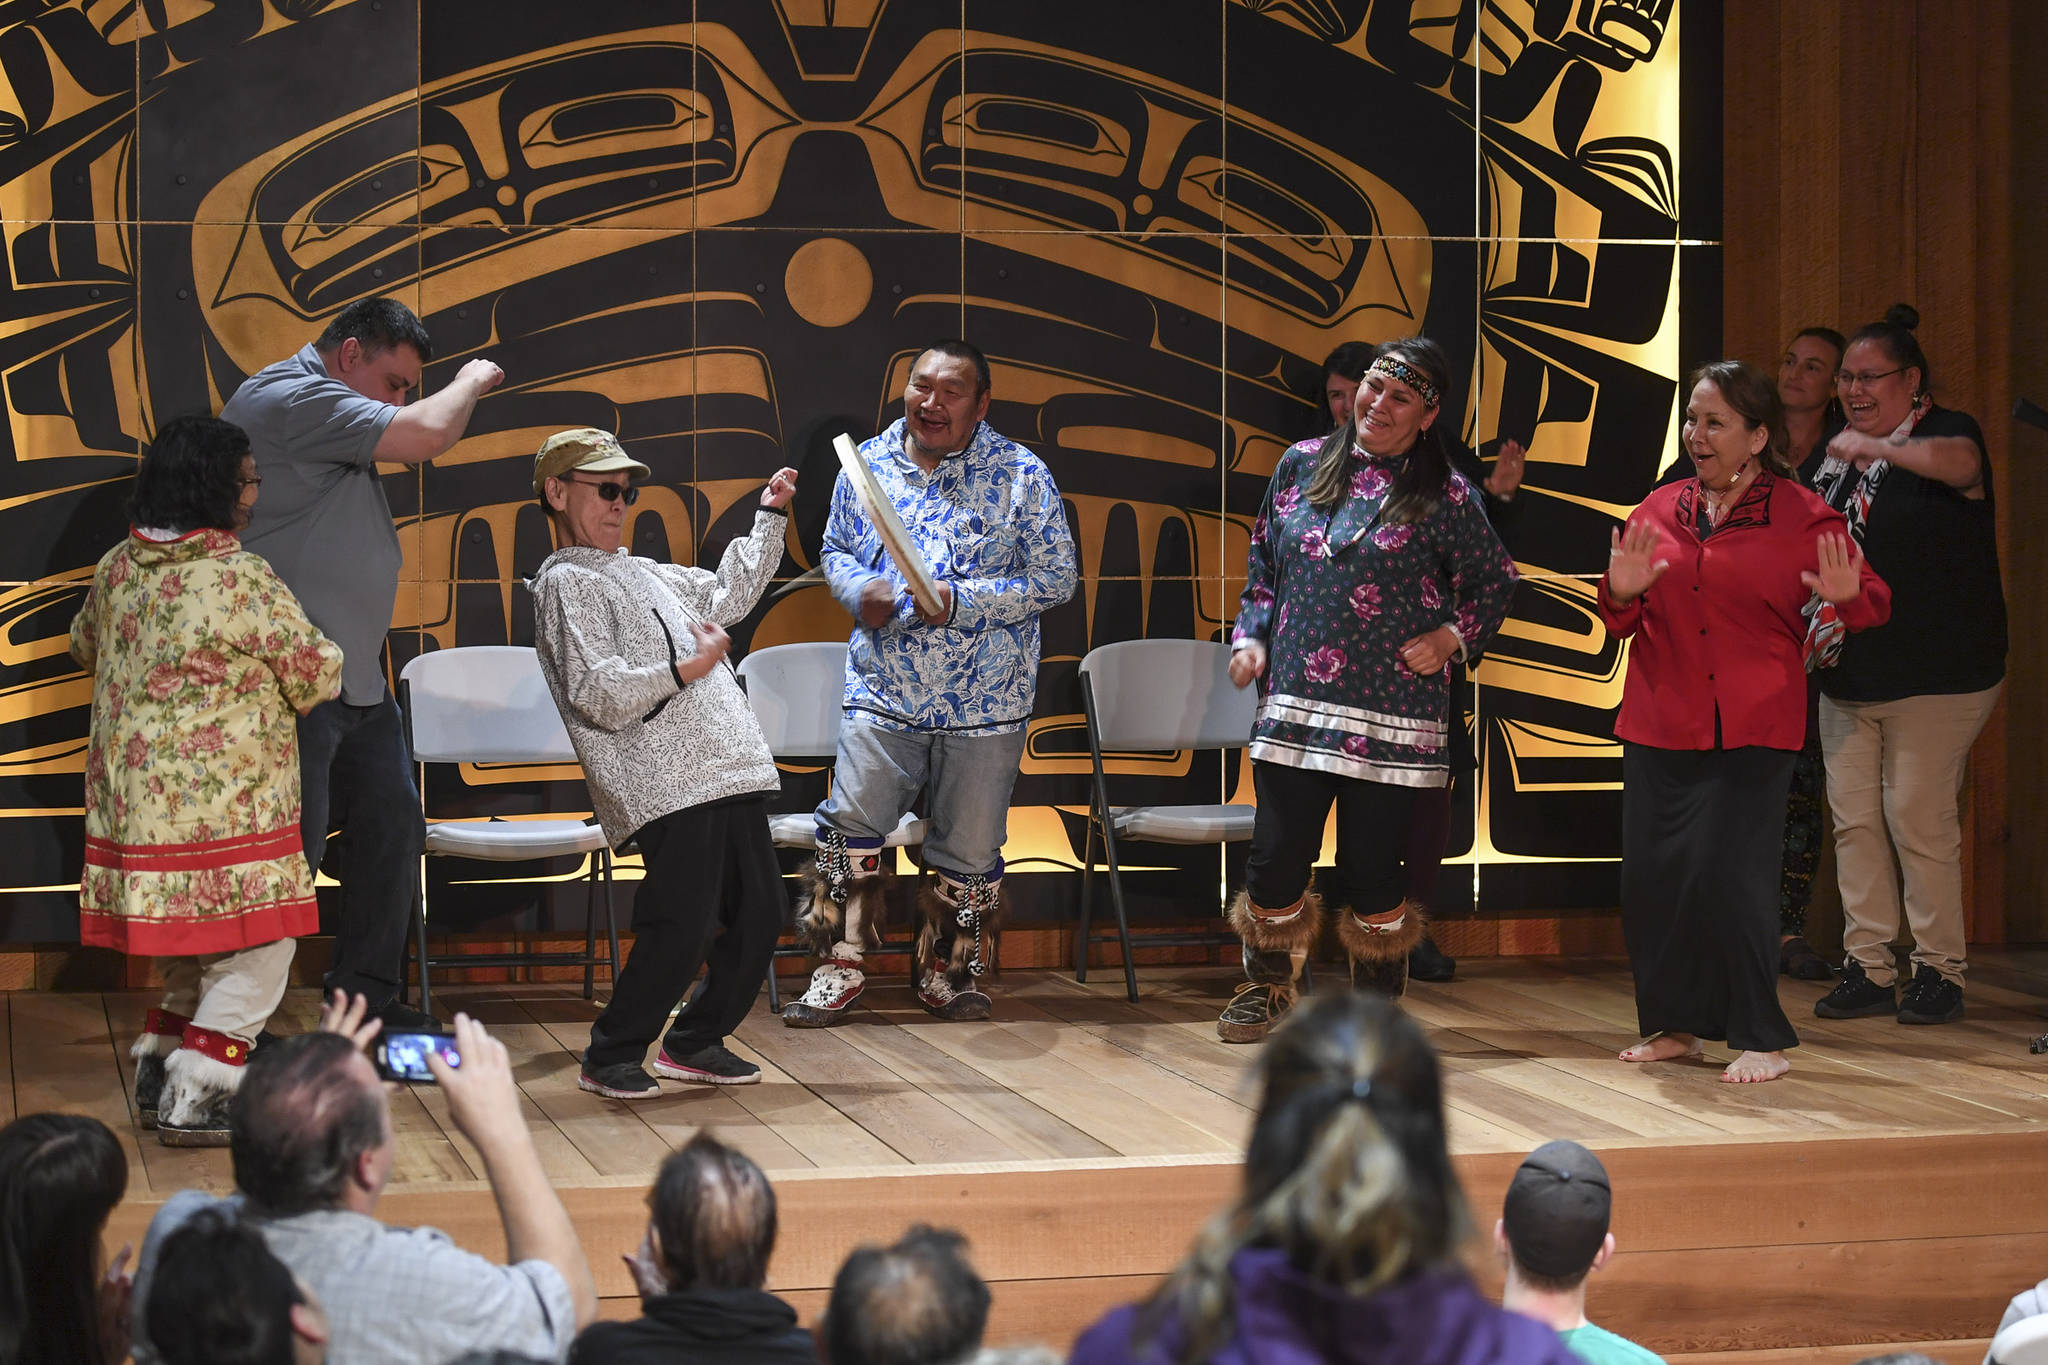 Sealaska Heritage Institute Artists-in-Residence John Waghiyi and his wife, Arlene Annogiyuk Waghiyi, from Savoonga, invite audience members to dance to their St. Lawrence Island rock and roll song at the Walter Soboleff Center on Wednesday, Aug. 28, 2019. (Michael Penn | Juneau Empire)